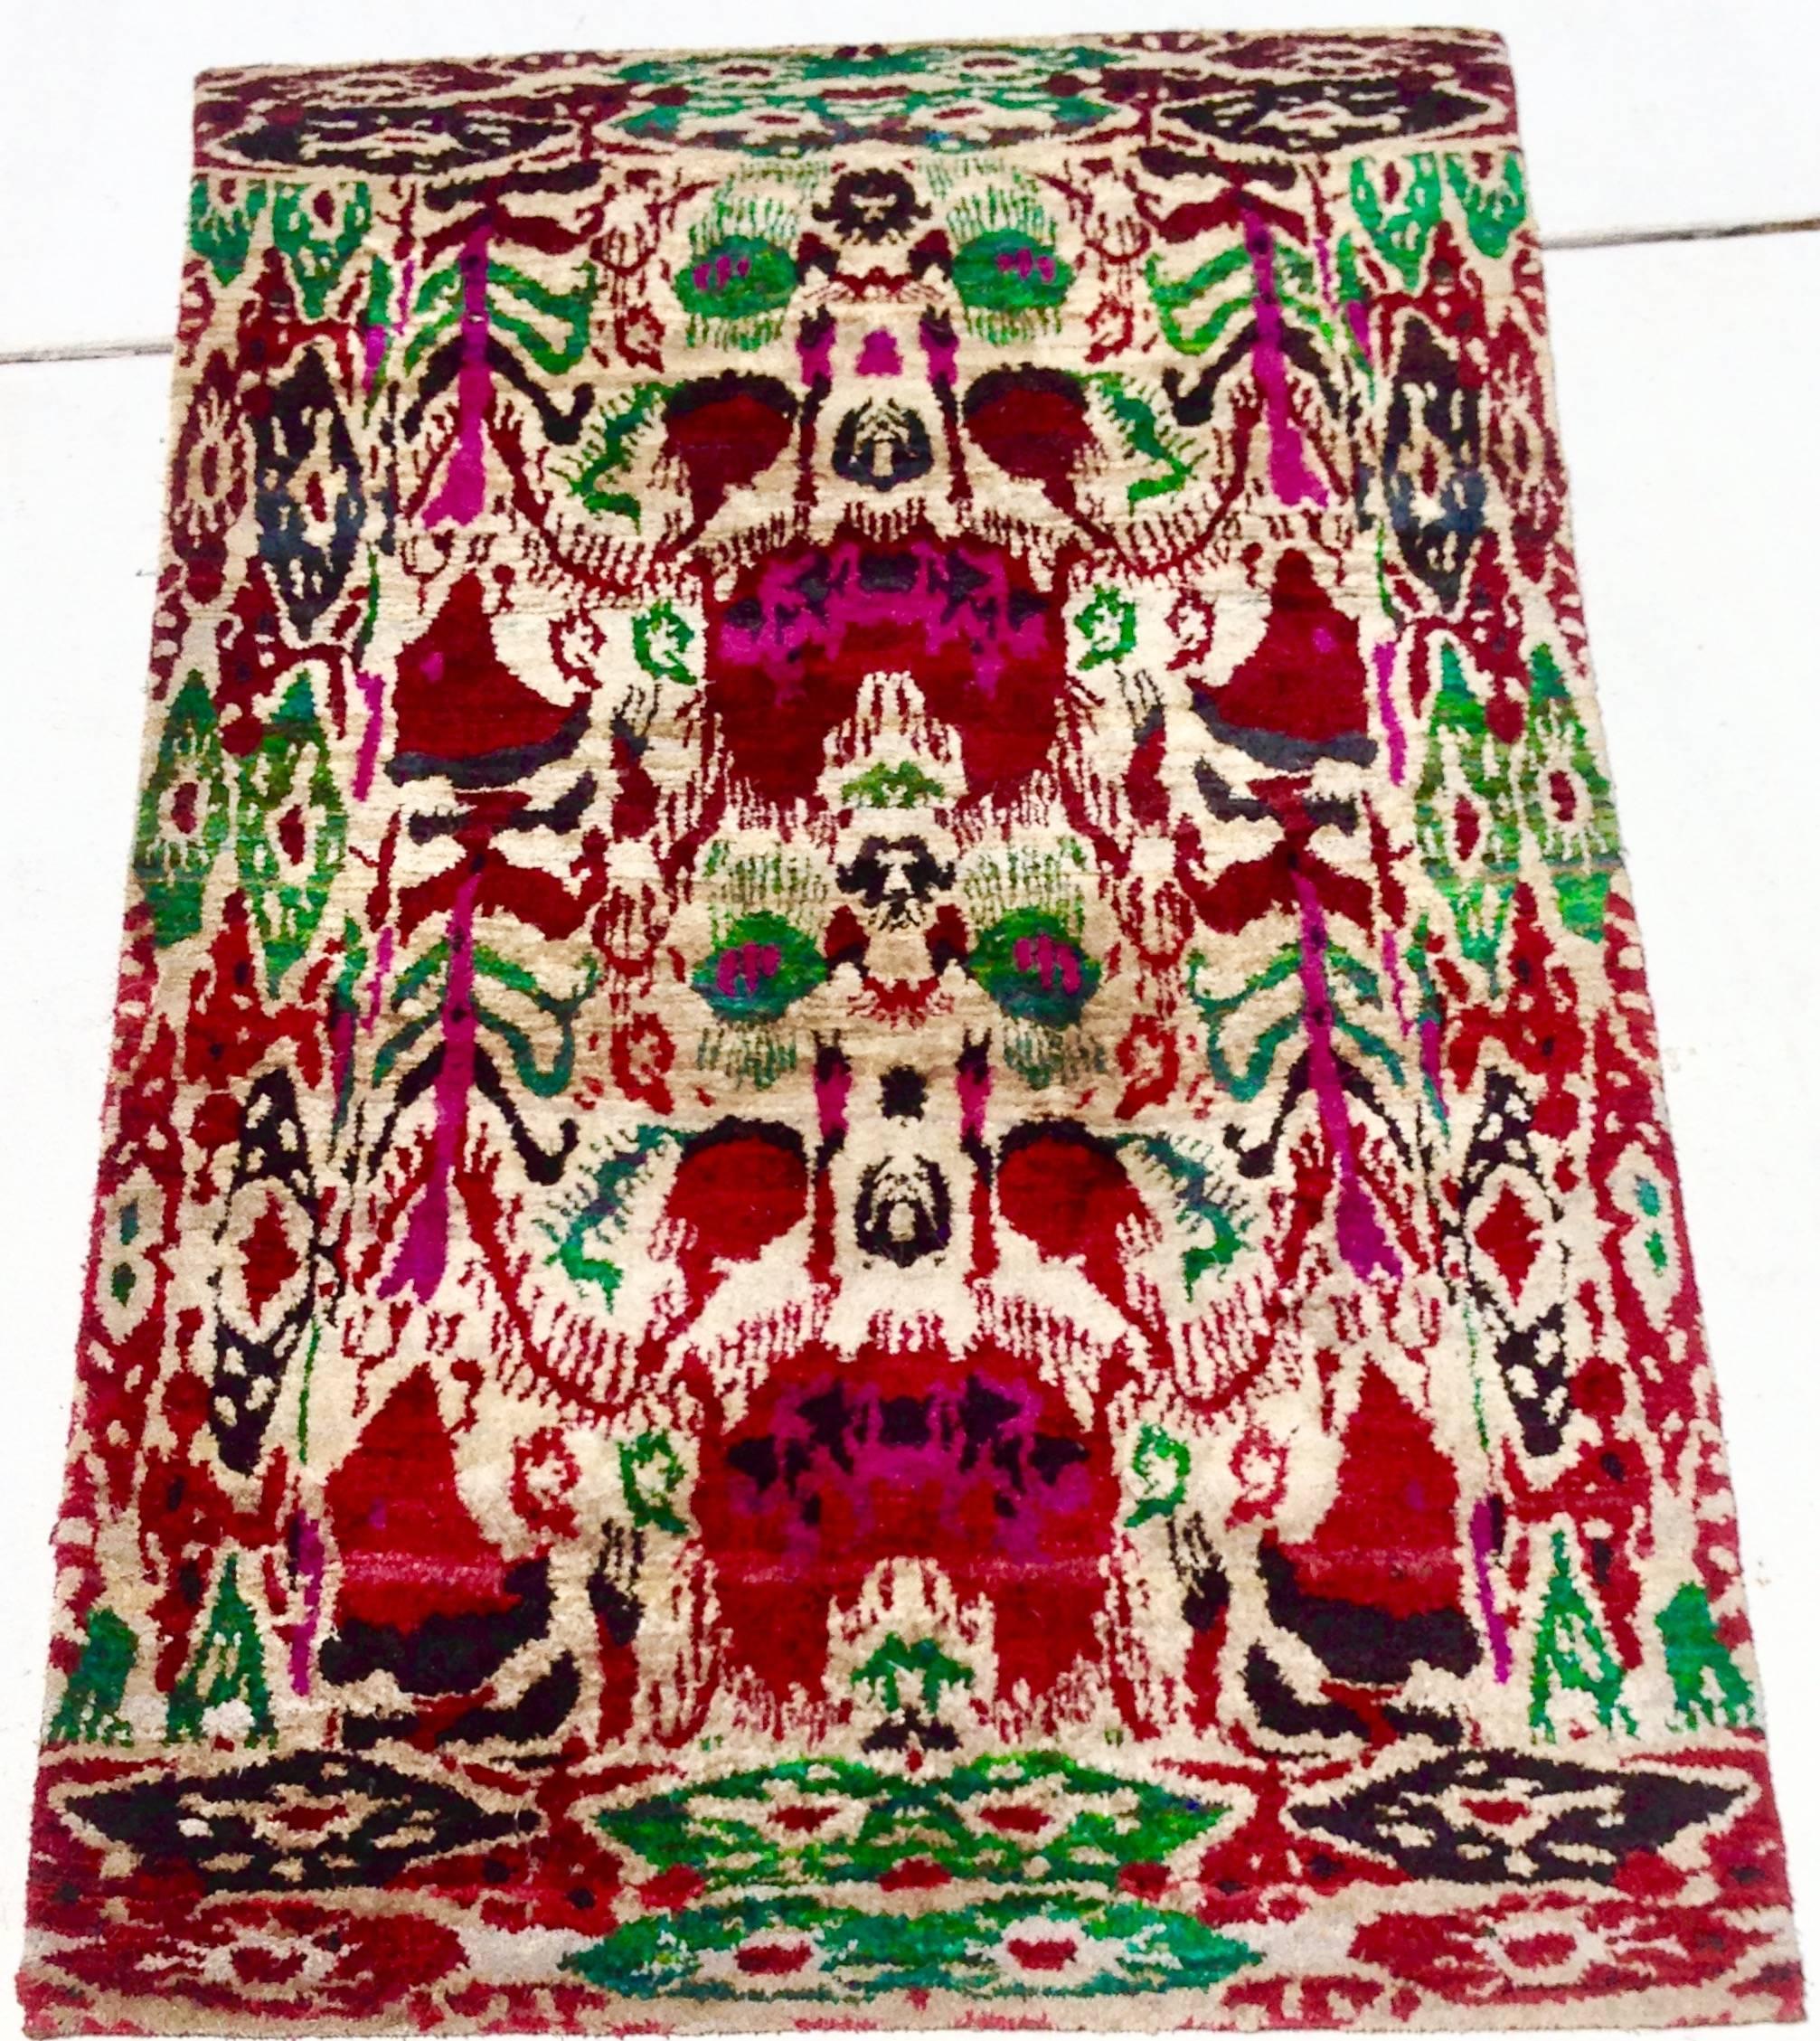 Vintage, One Of A Kind Custom Vibrant Jewel Tone Silk Ikat Hand Knotted Rug Made From Vintage Silk Sari's. This One-of-a-kind piece reinvents traditional patterns and ancient motifs through a contemporary chromatic spectrum. Handmade by master